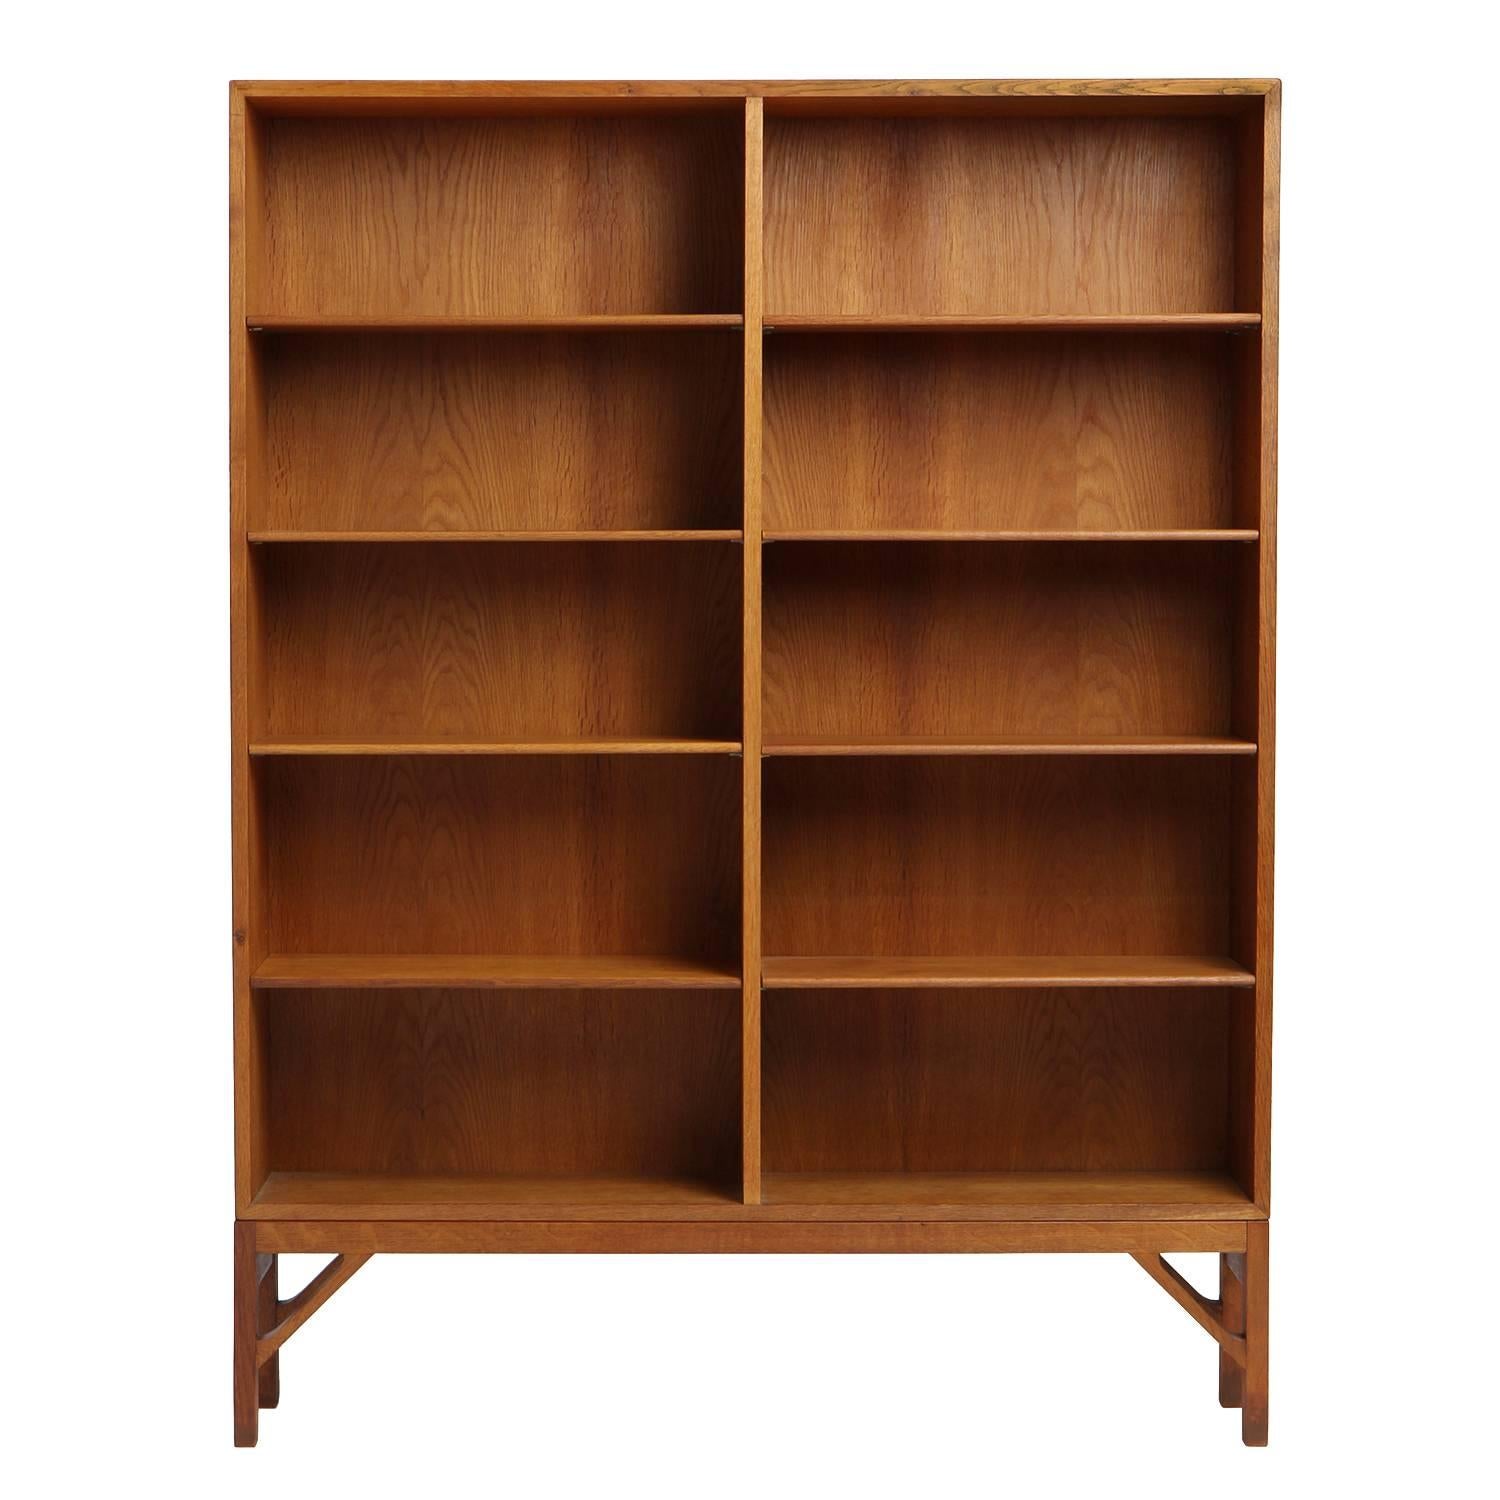 A spare and elegant Scandinavian Modern standing bookshelf / bookcase designed by Borge Mogensen. Unit is constructed in solid active-grained oakwood with adjustable shelves and an architectural base with trussed supports. Made in Denmark, circa